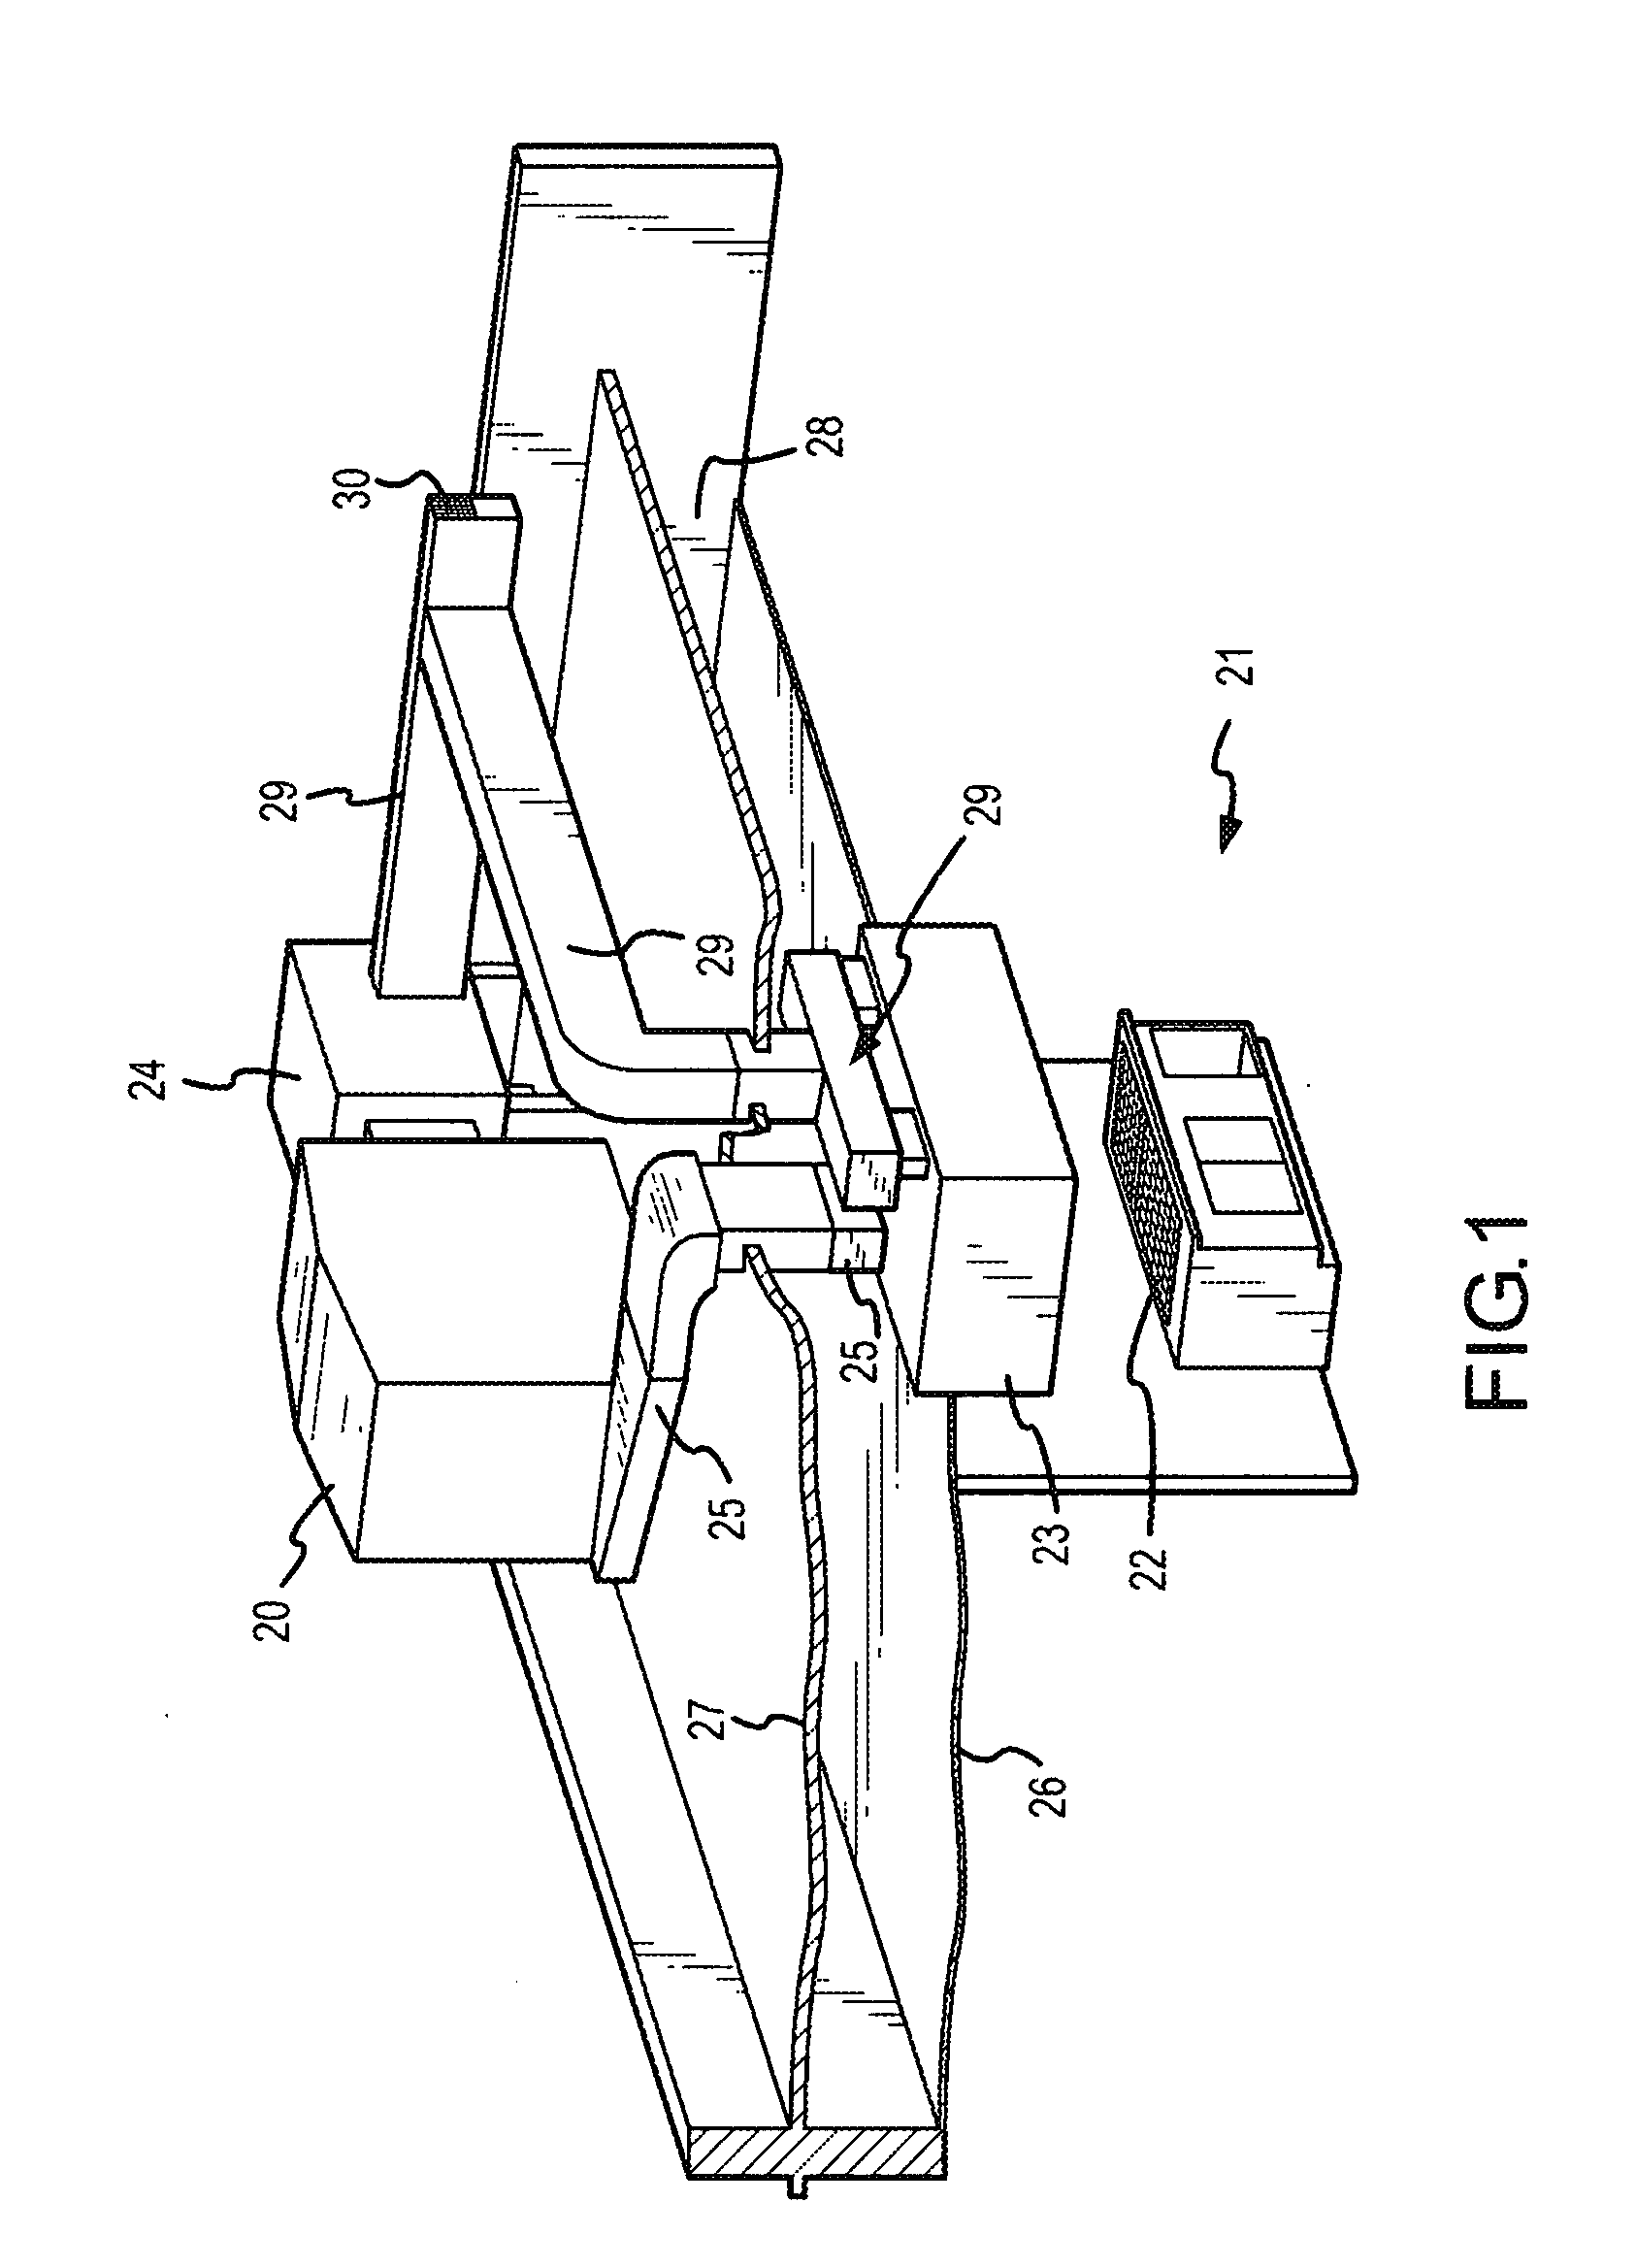 Apparatus and method for cleaning, neutralizing carbon monoxide and recirculating exhaust air in a confined environment